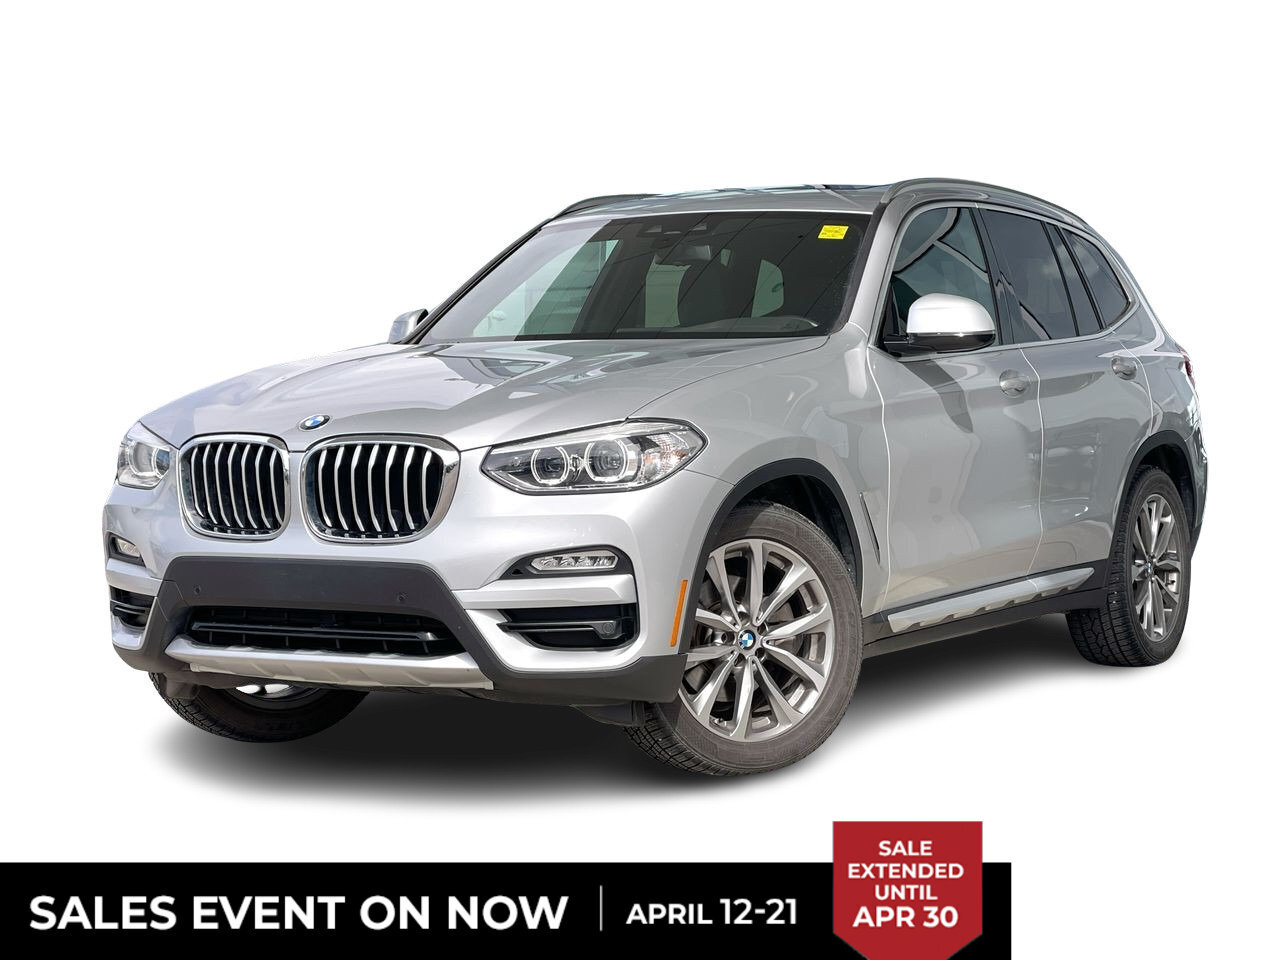 2019 BMW X3 XDrive30i 1 Owner, Local Trade-In, Premium Package